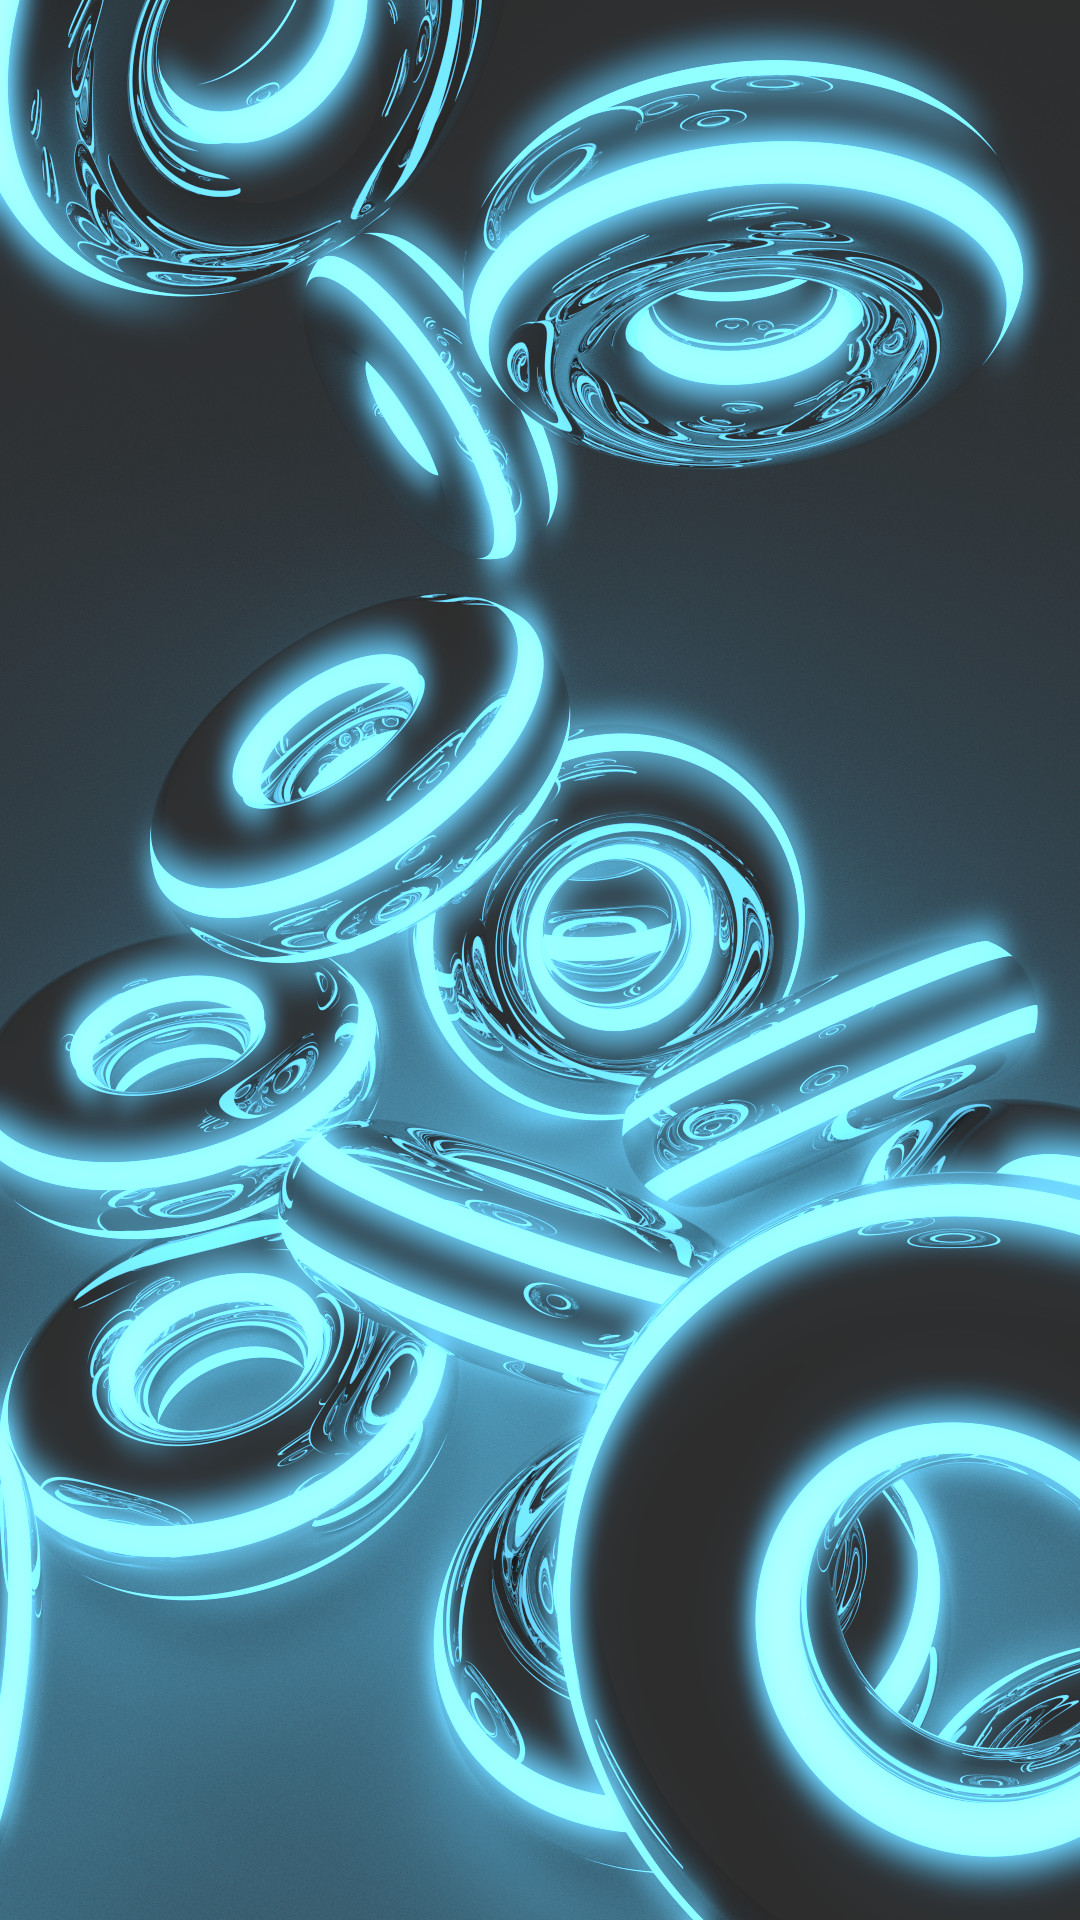 1080x1920 HTC Droid DNA Wallpaper: Blue neon donuts Mobile Android Wallpapers